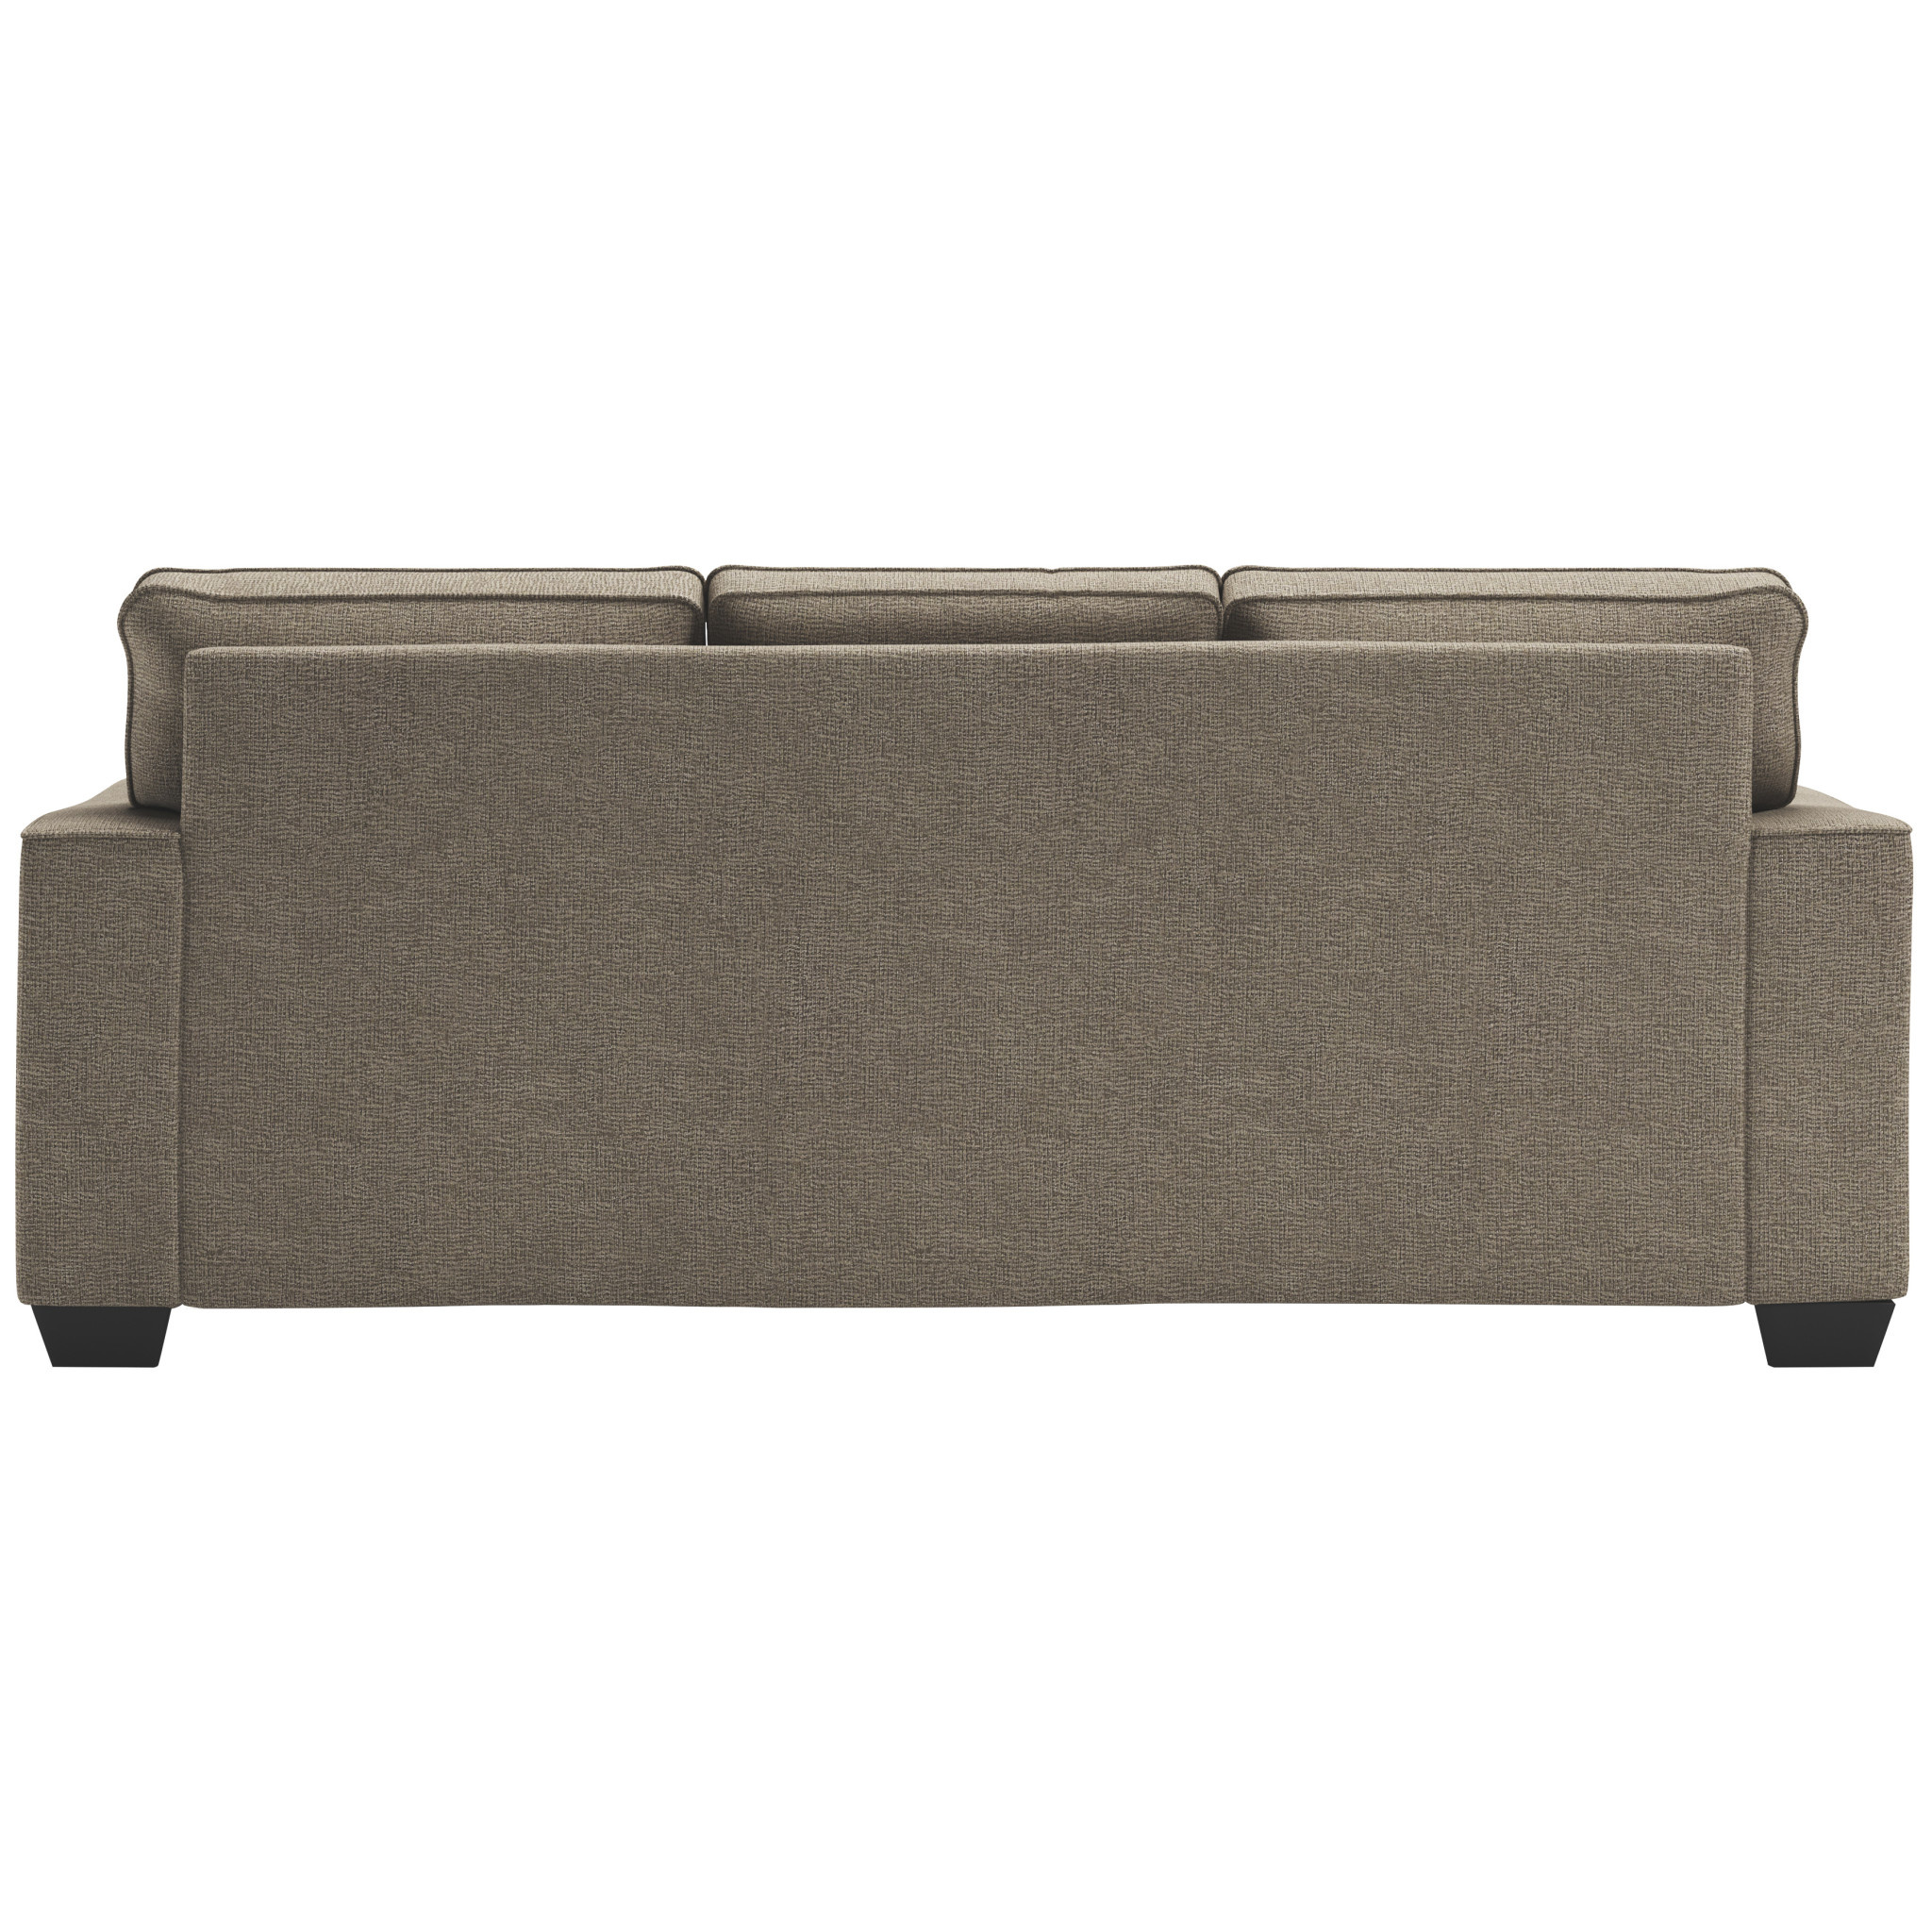 Signature Design "Greaves" Reversible Sofa Chaise- Driftwood 5510518